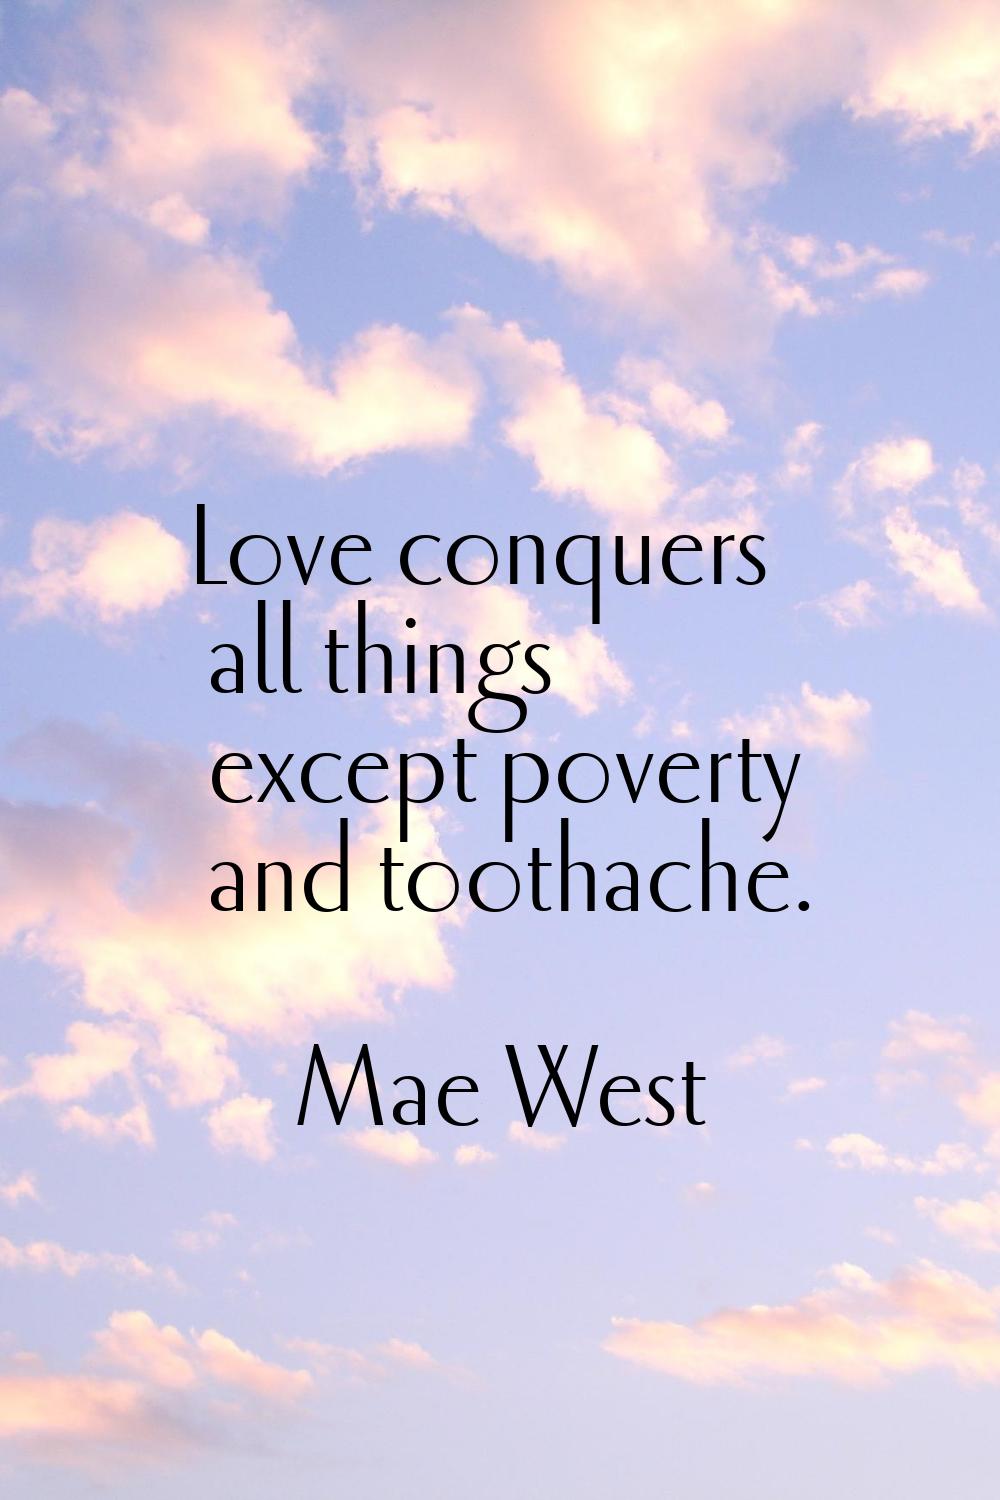 Love conquers all things except poverty and toothache.